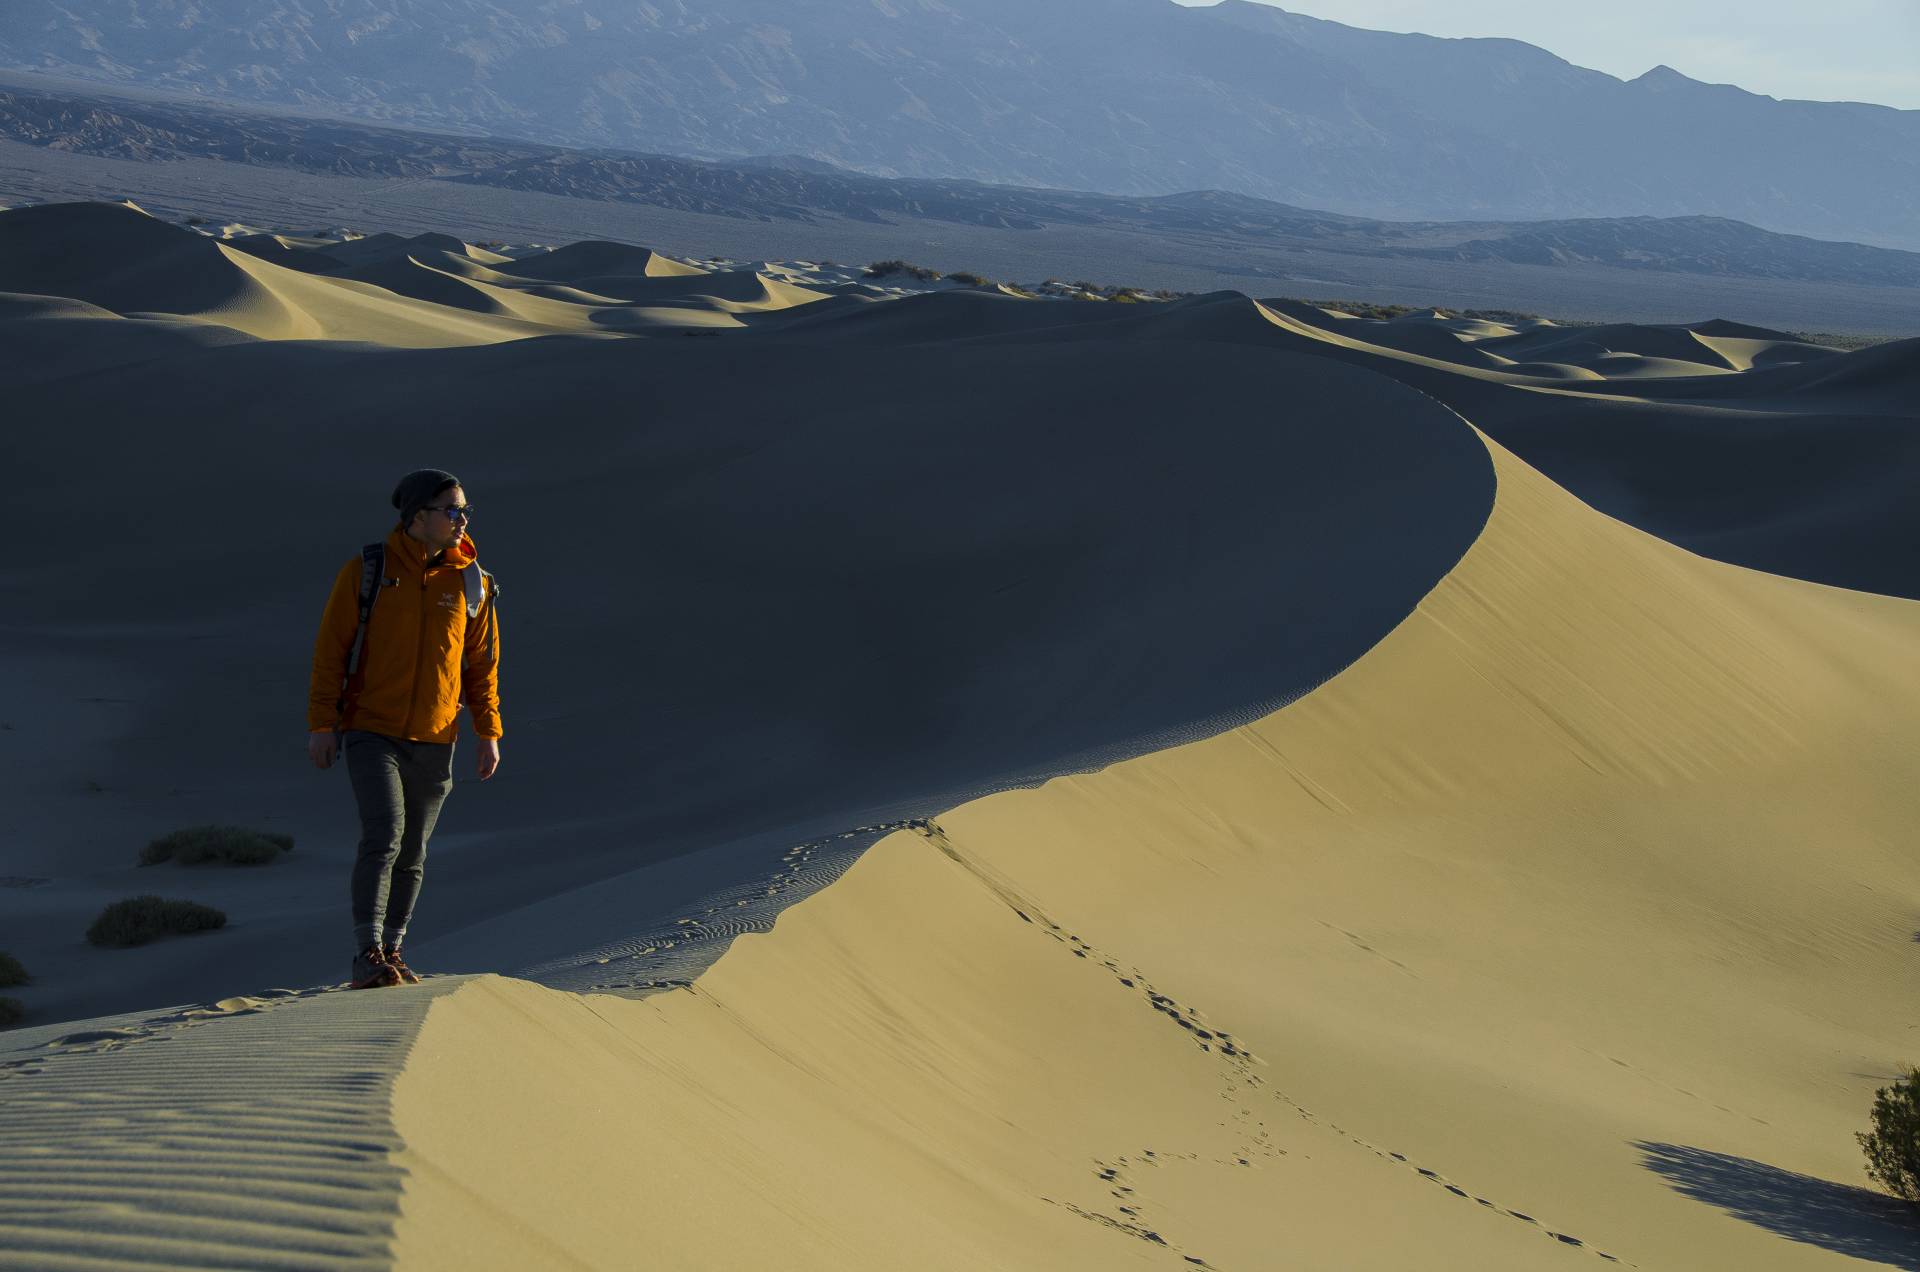 Hiking in the Mesquite Sand Dunes, Death Valley National Park, California